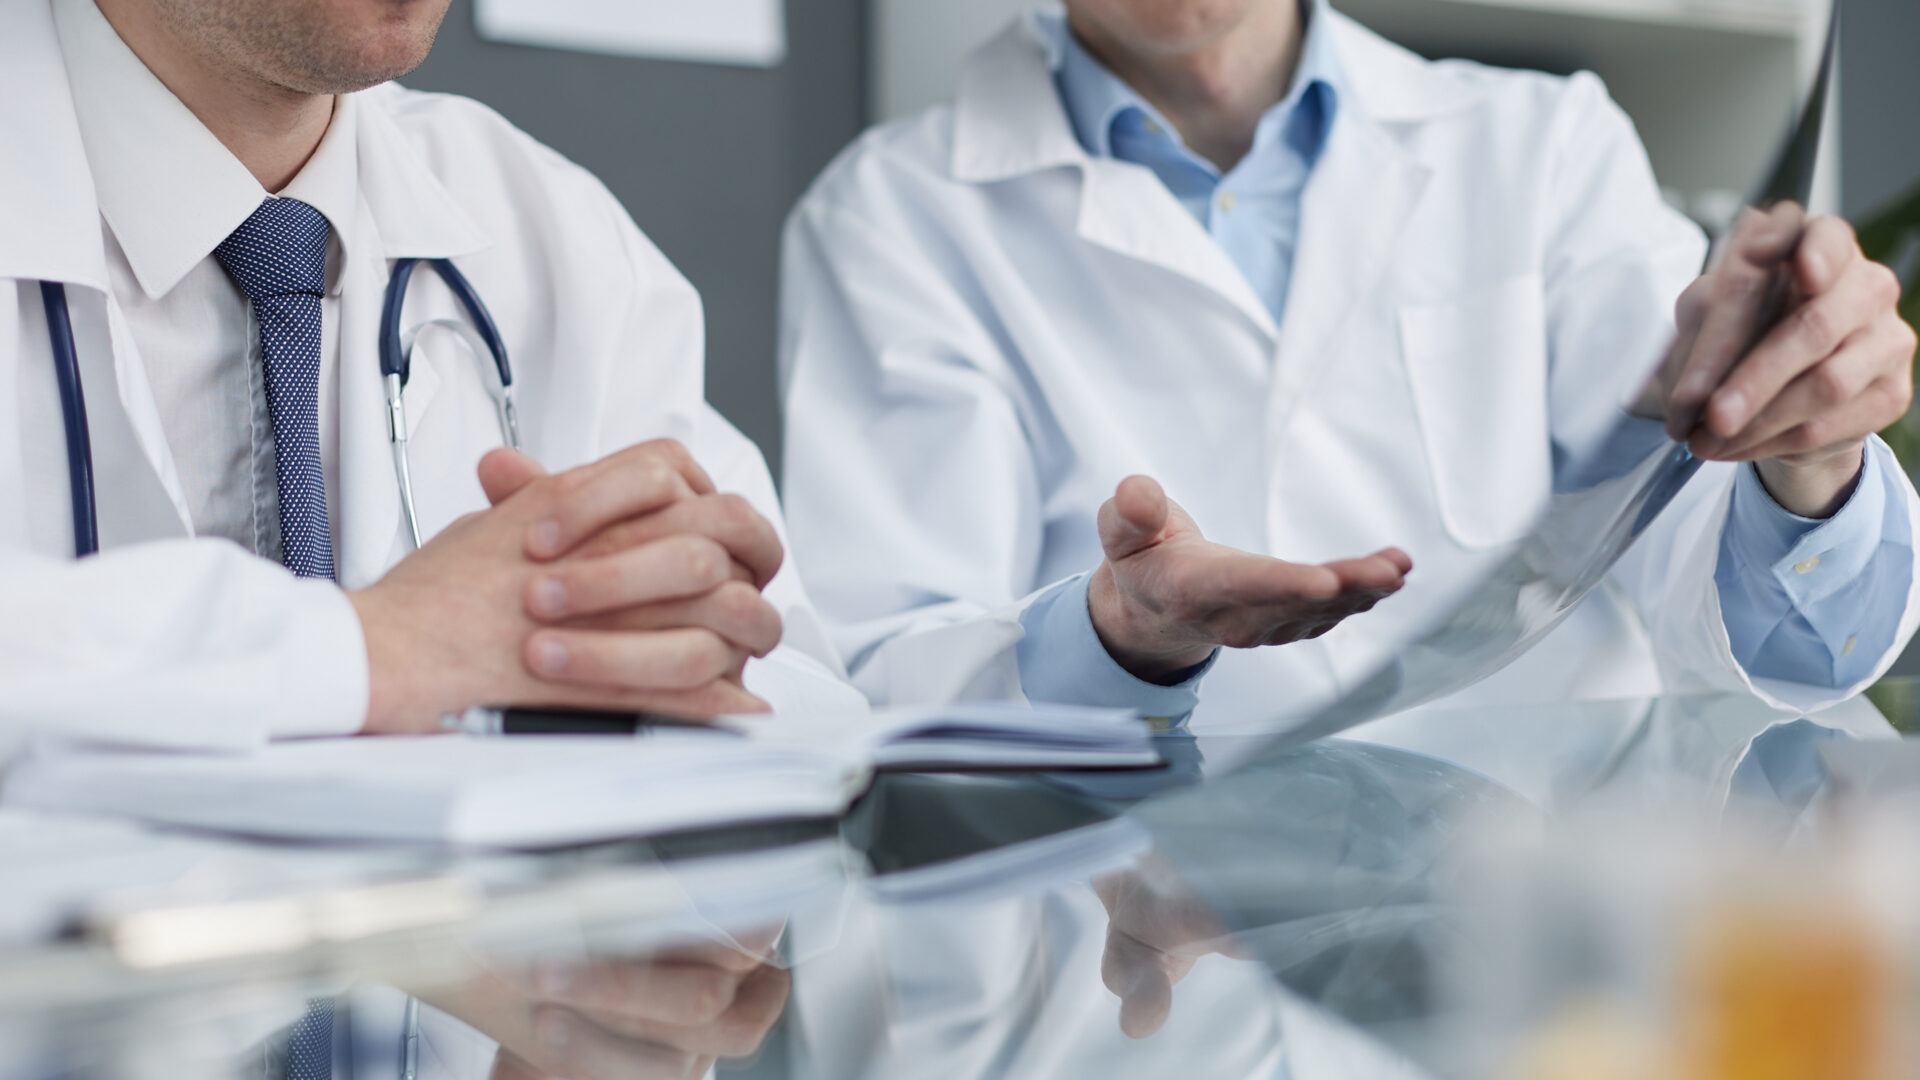 Diagnosis error - two male doctors discussing a diagnosis